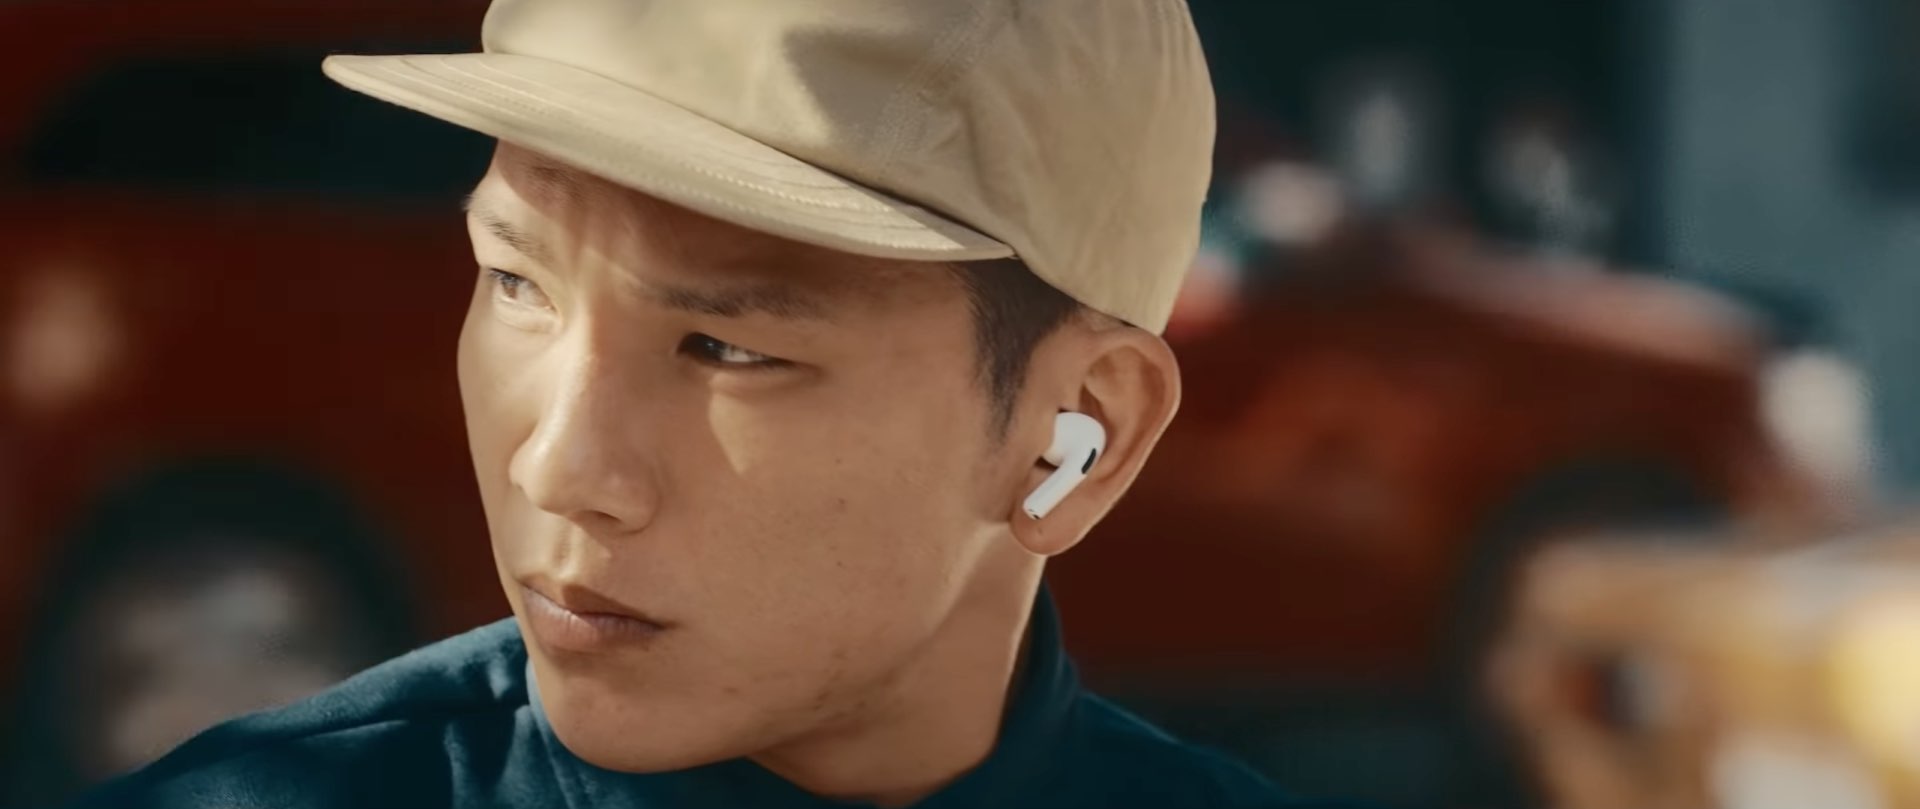 A closeup of a young male's face wearing AirPods Pro in their ears